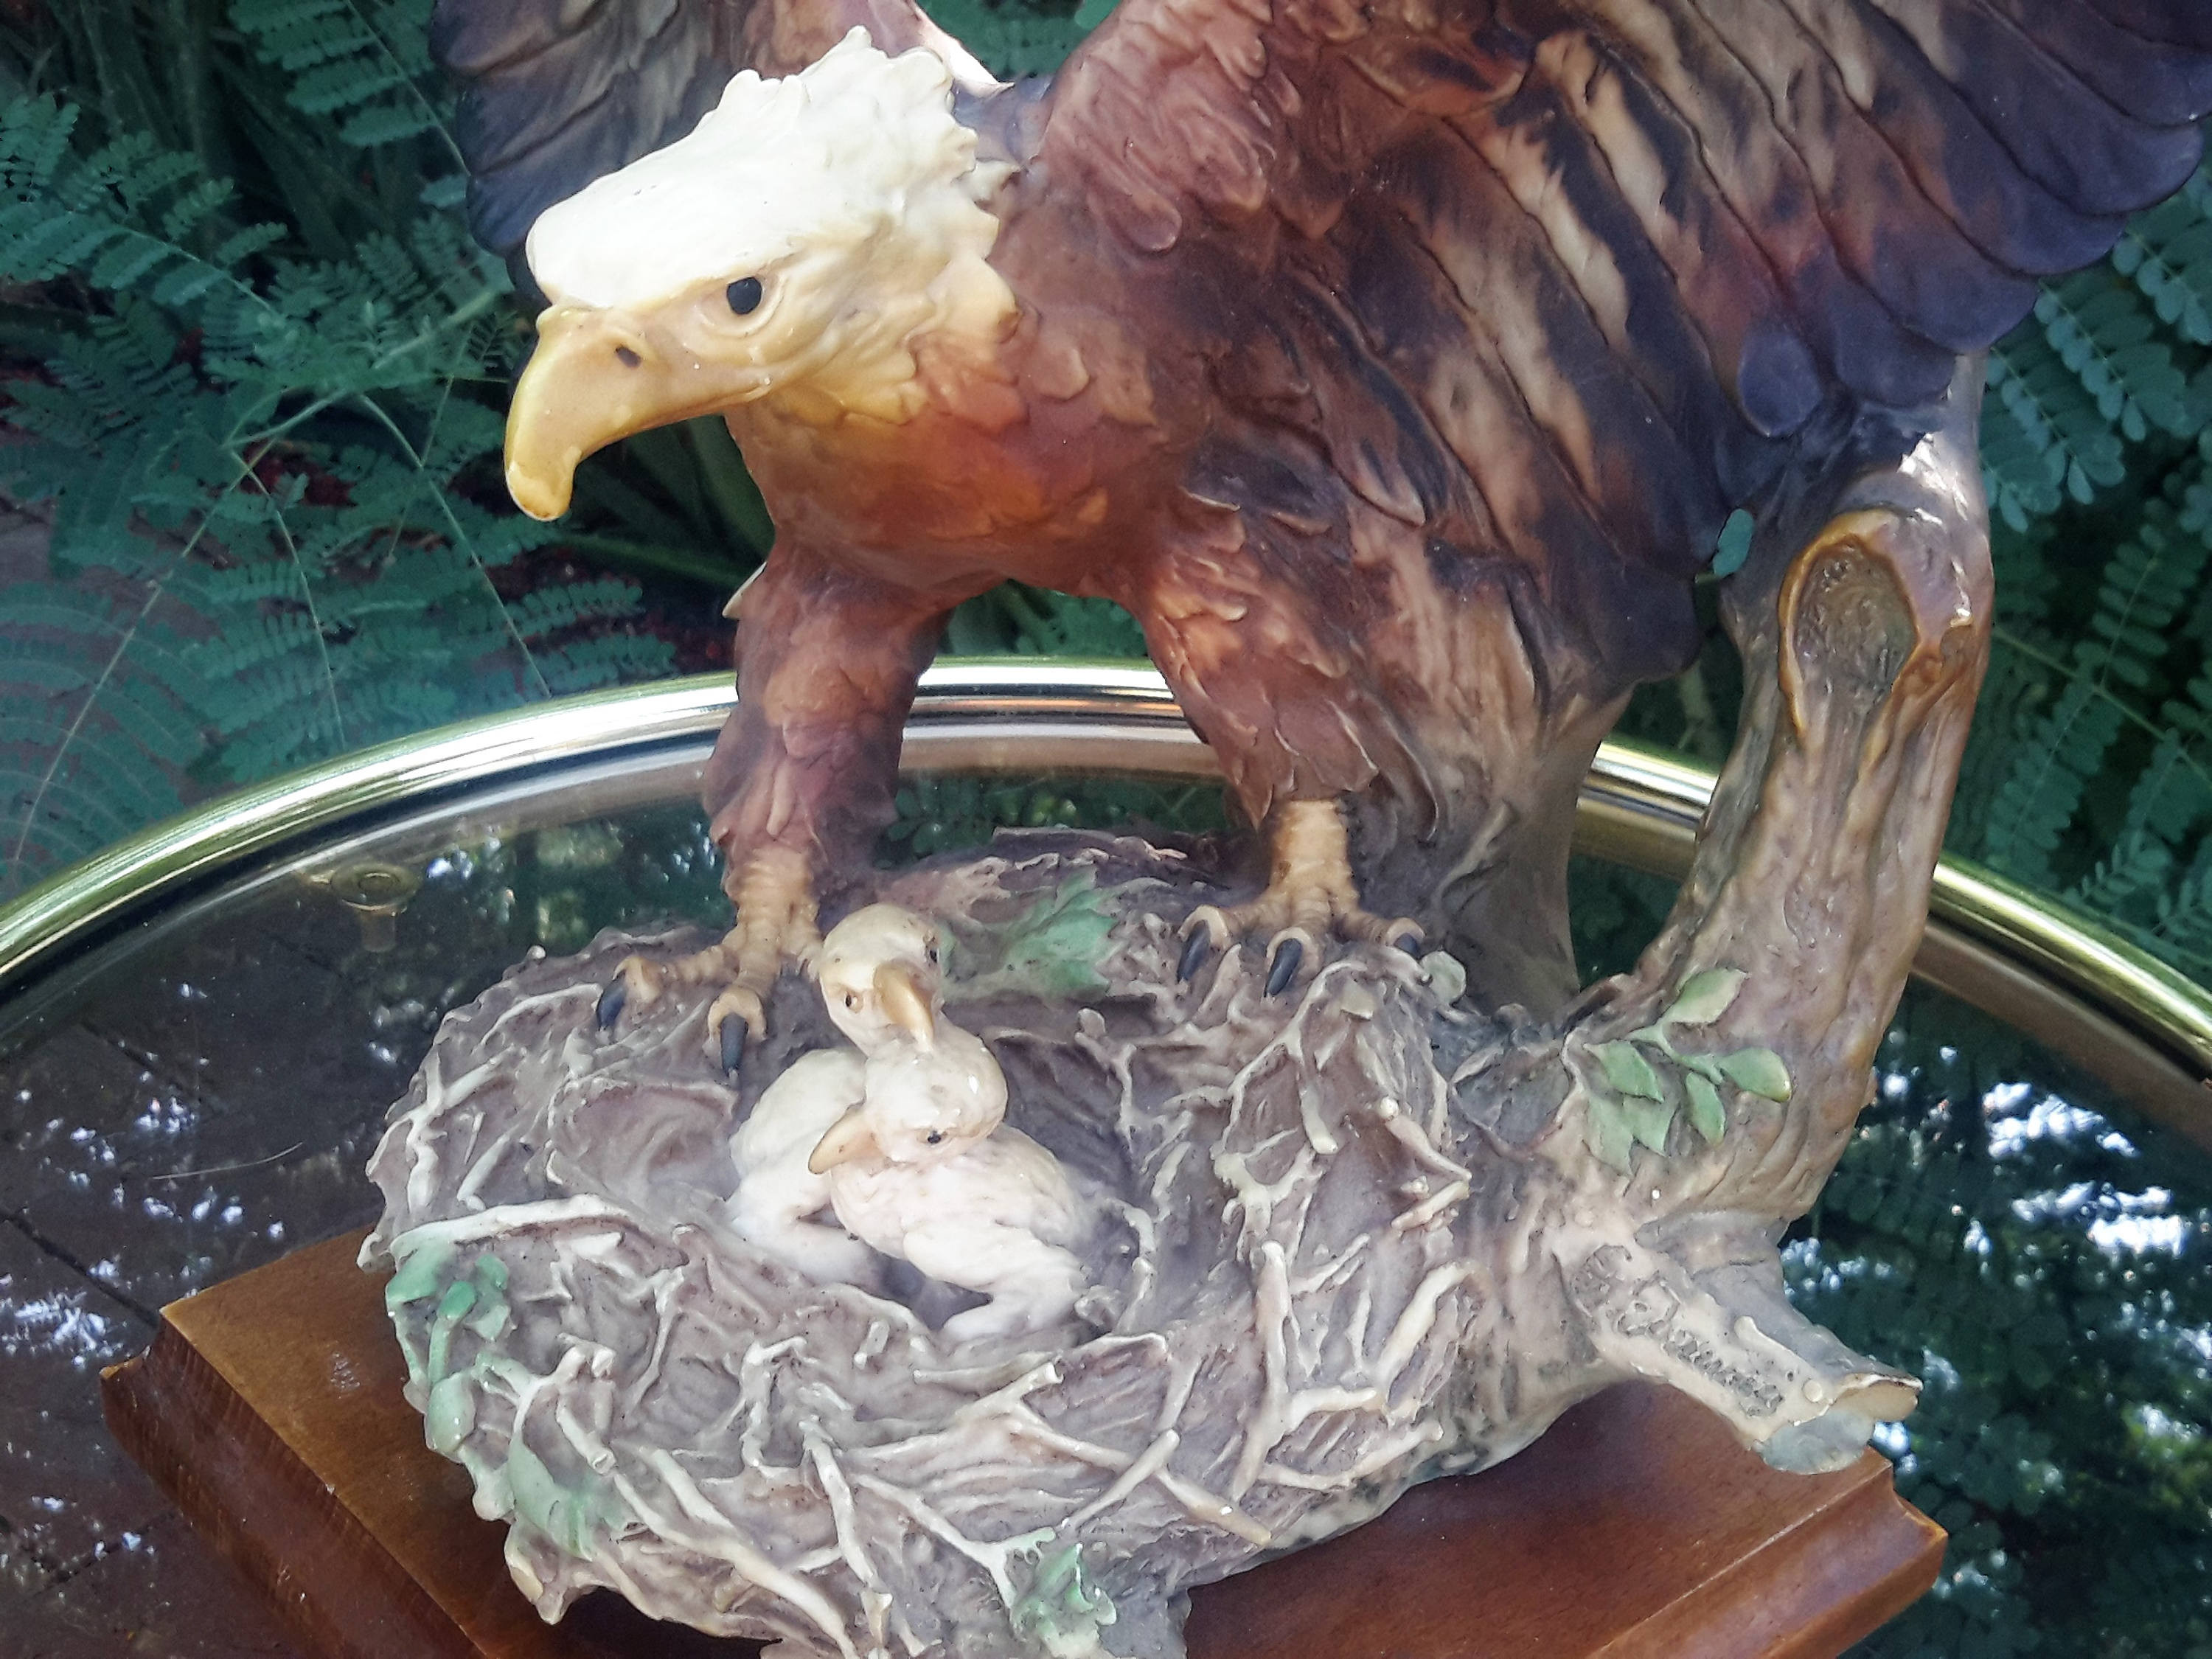 25 Famous Van Briggle Indian Head Vase 2024 free download van briggle indian head vase of giuseppe armani sculpture bald eagle with eaglets on nest etsy within dc29fc294c28ezoom